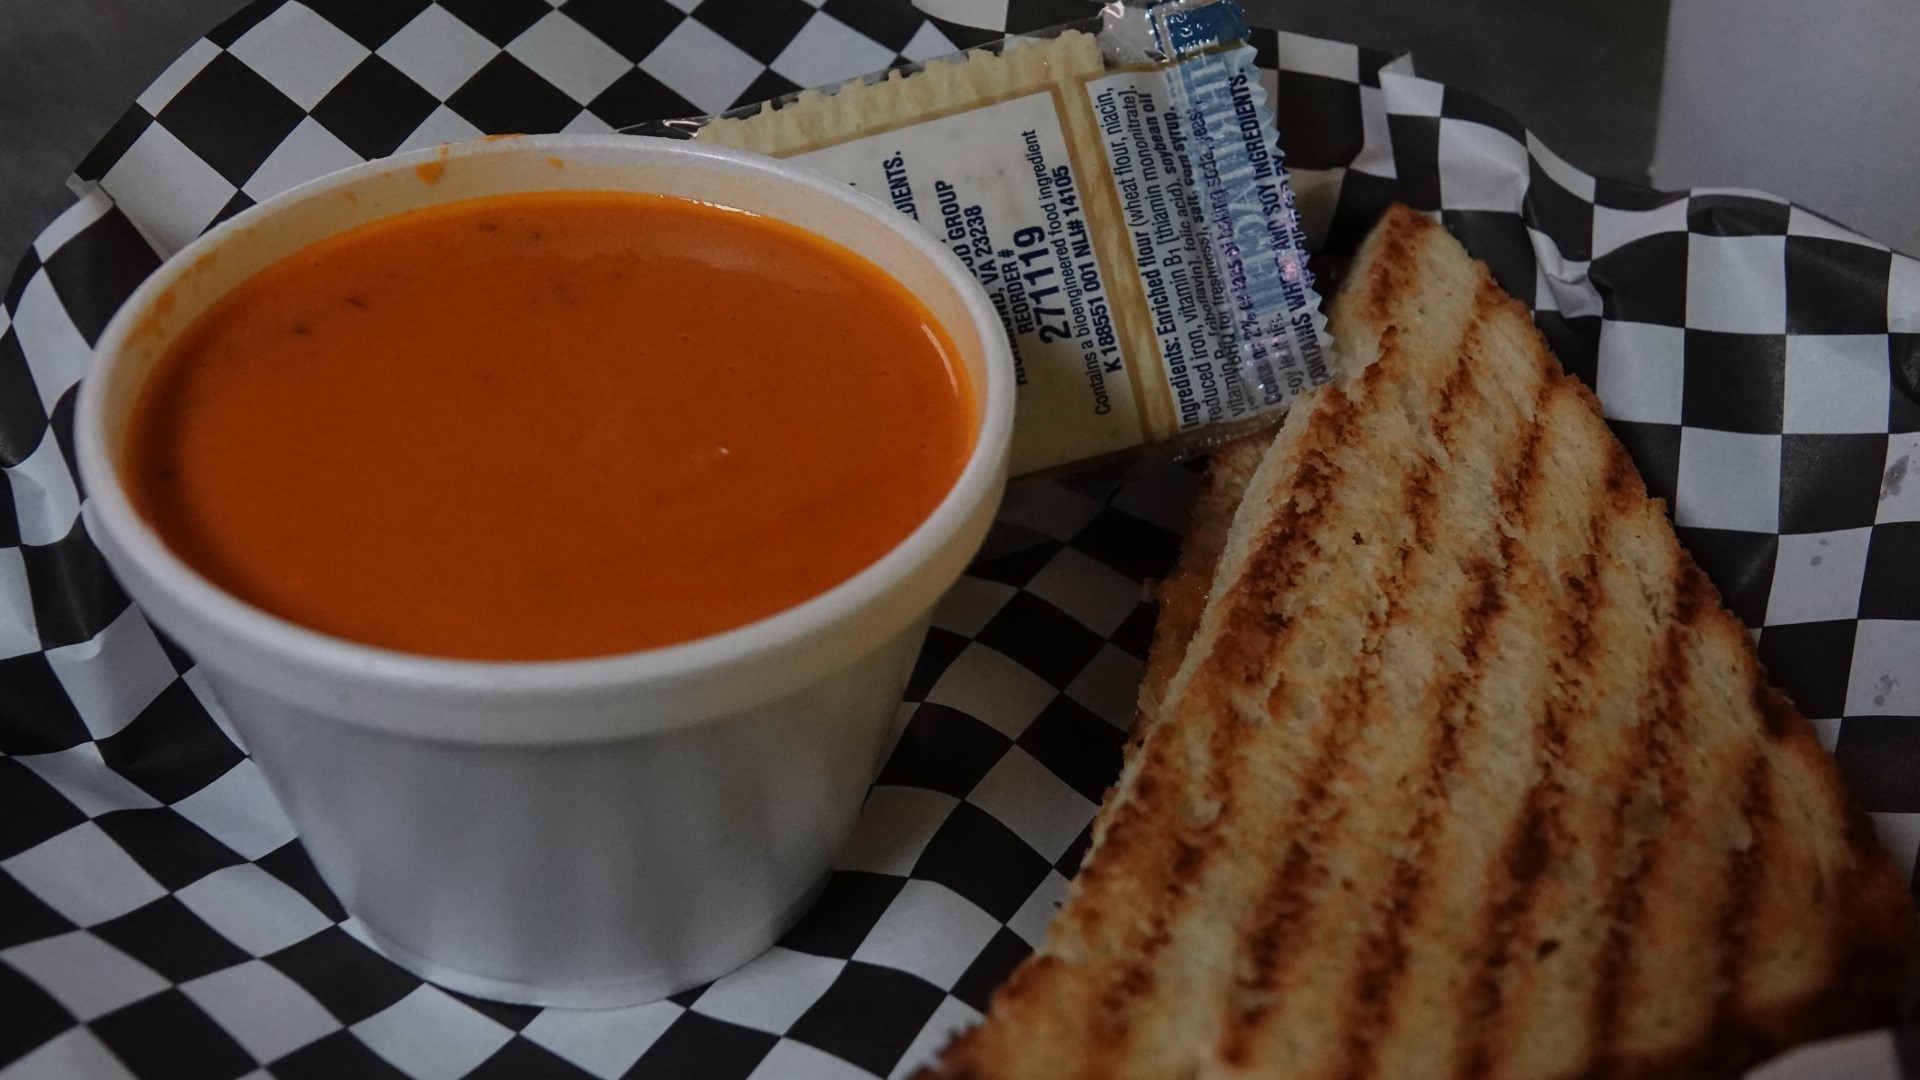 People come from all over to try their roasted red pepper and tomato basil soups.